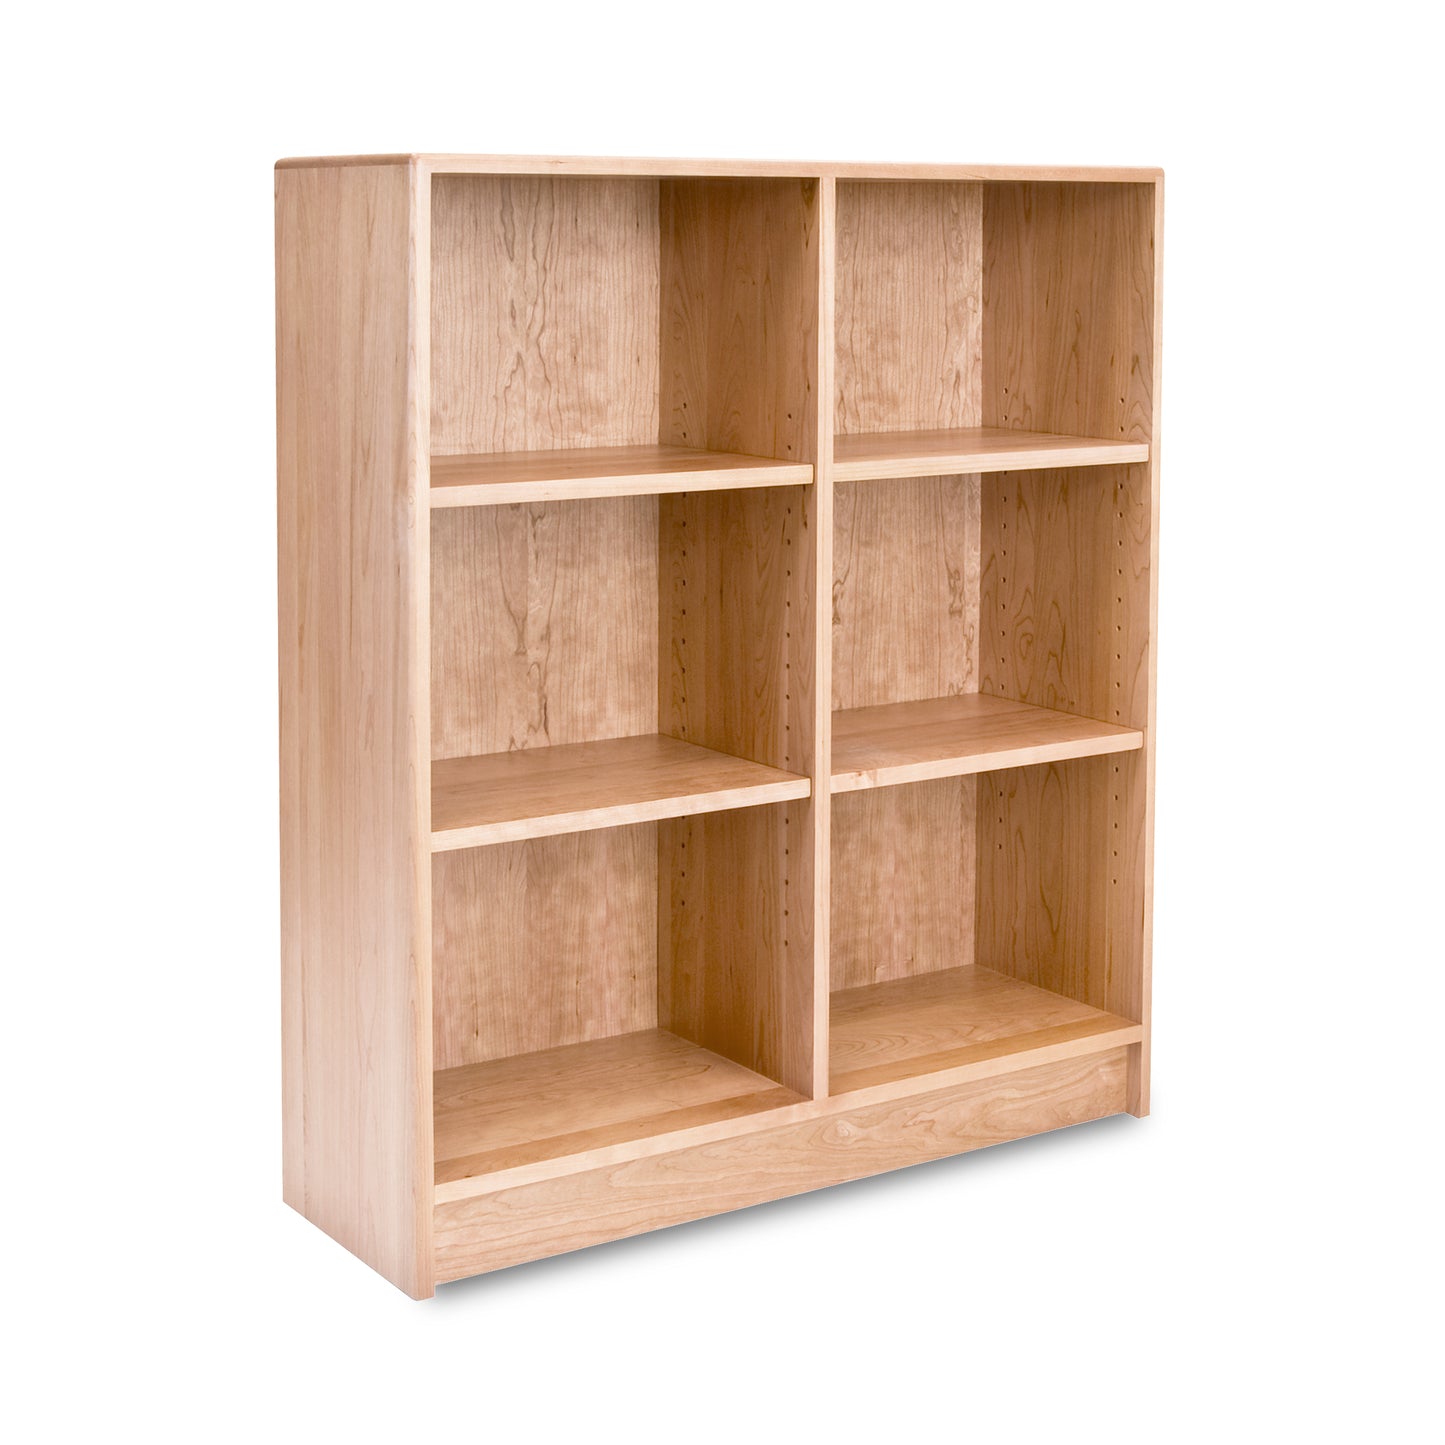 A Lyndon Furniture Contemporary Wide Bookcase made of hardwoods on a white background.